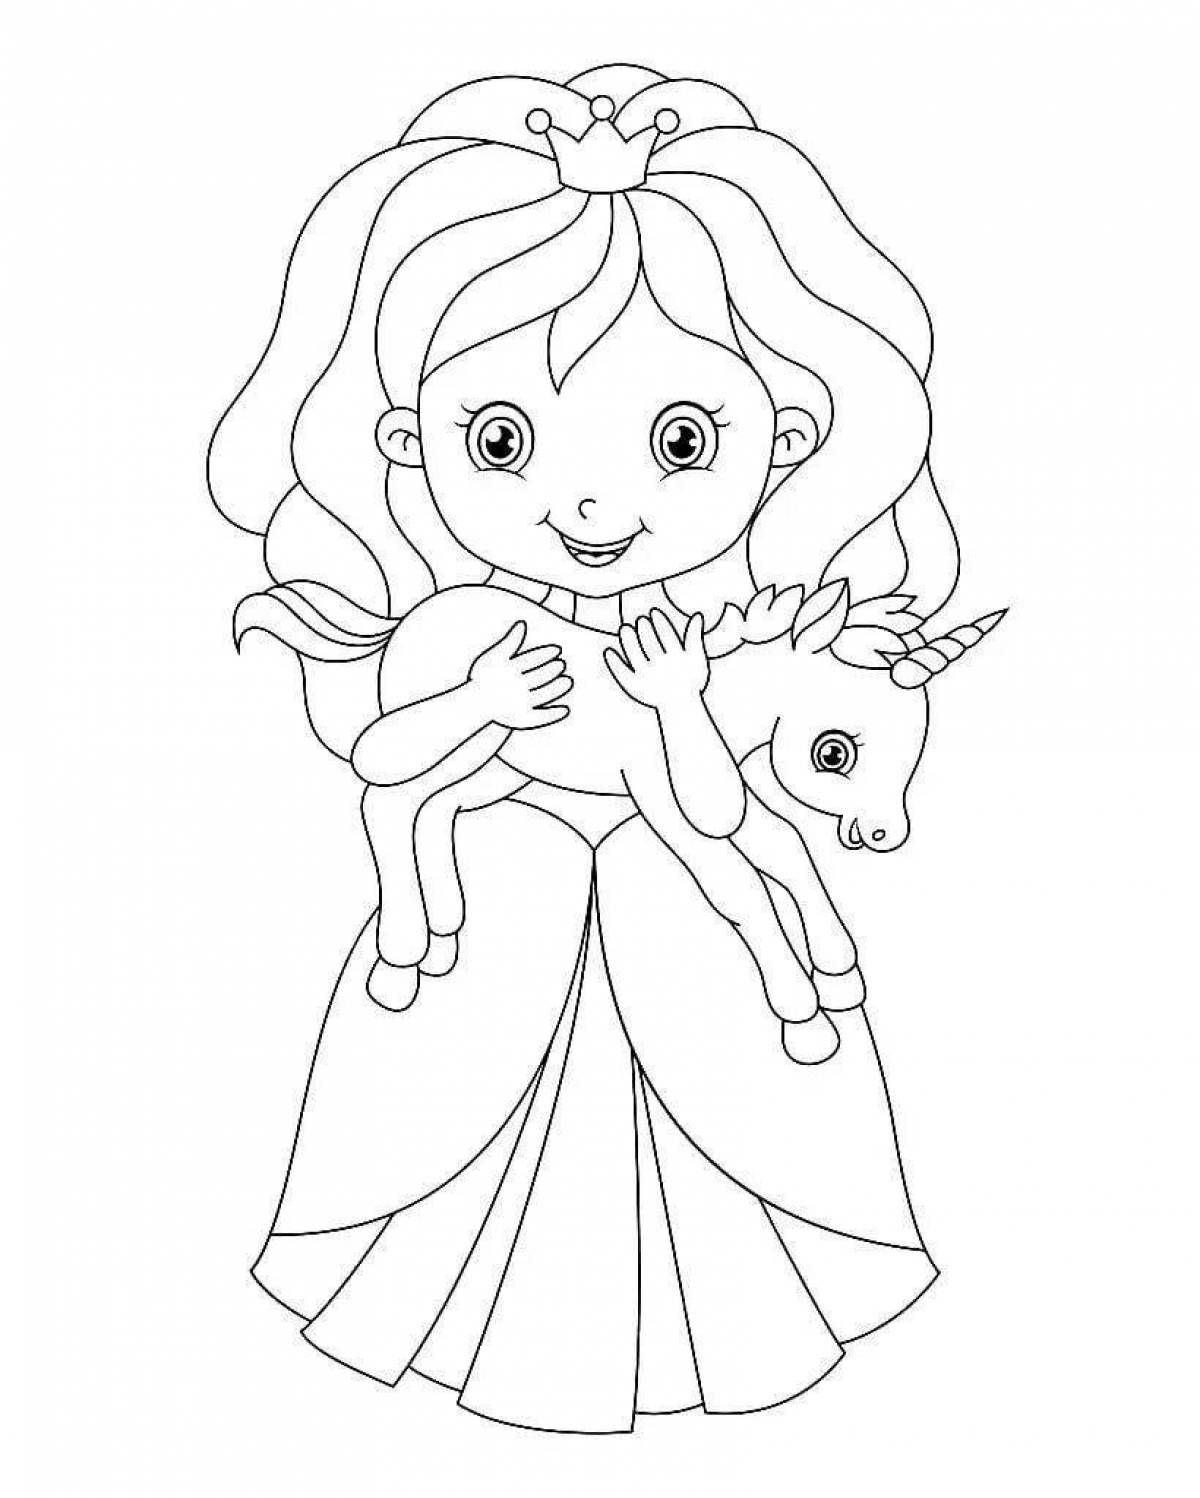 Dazzling coloring book for 3-4 year olds for girls princess